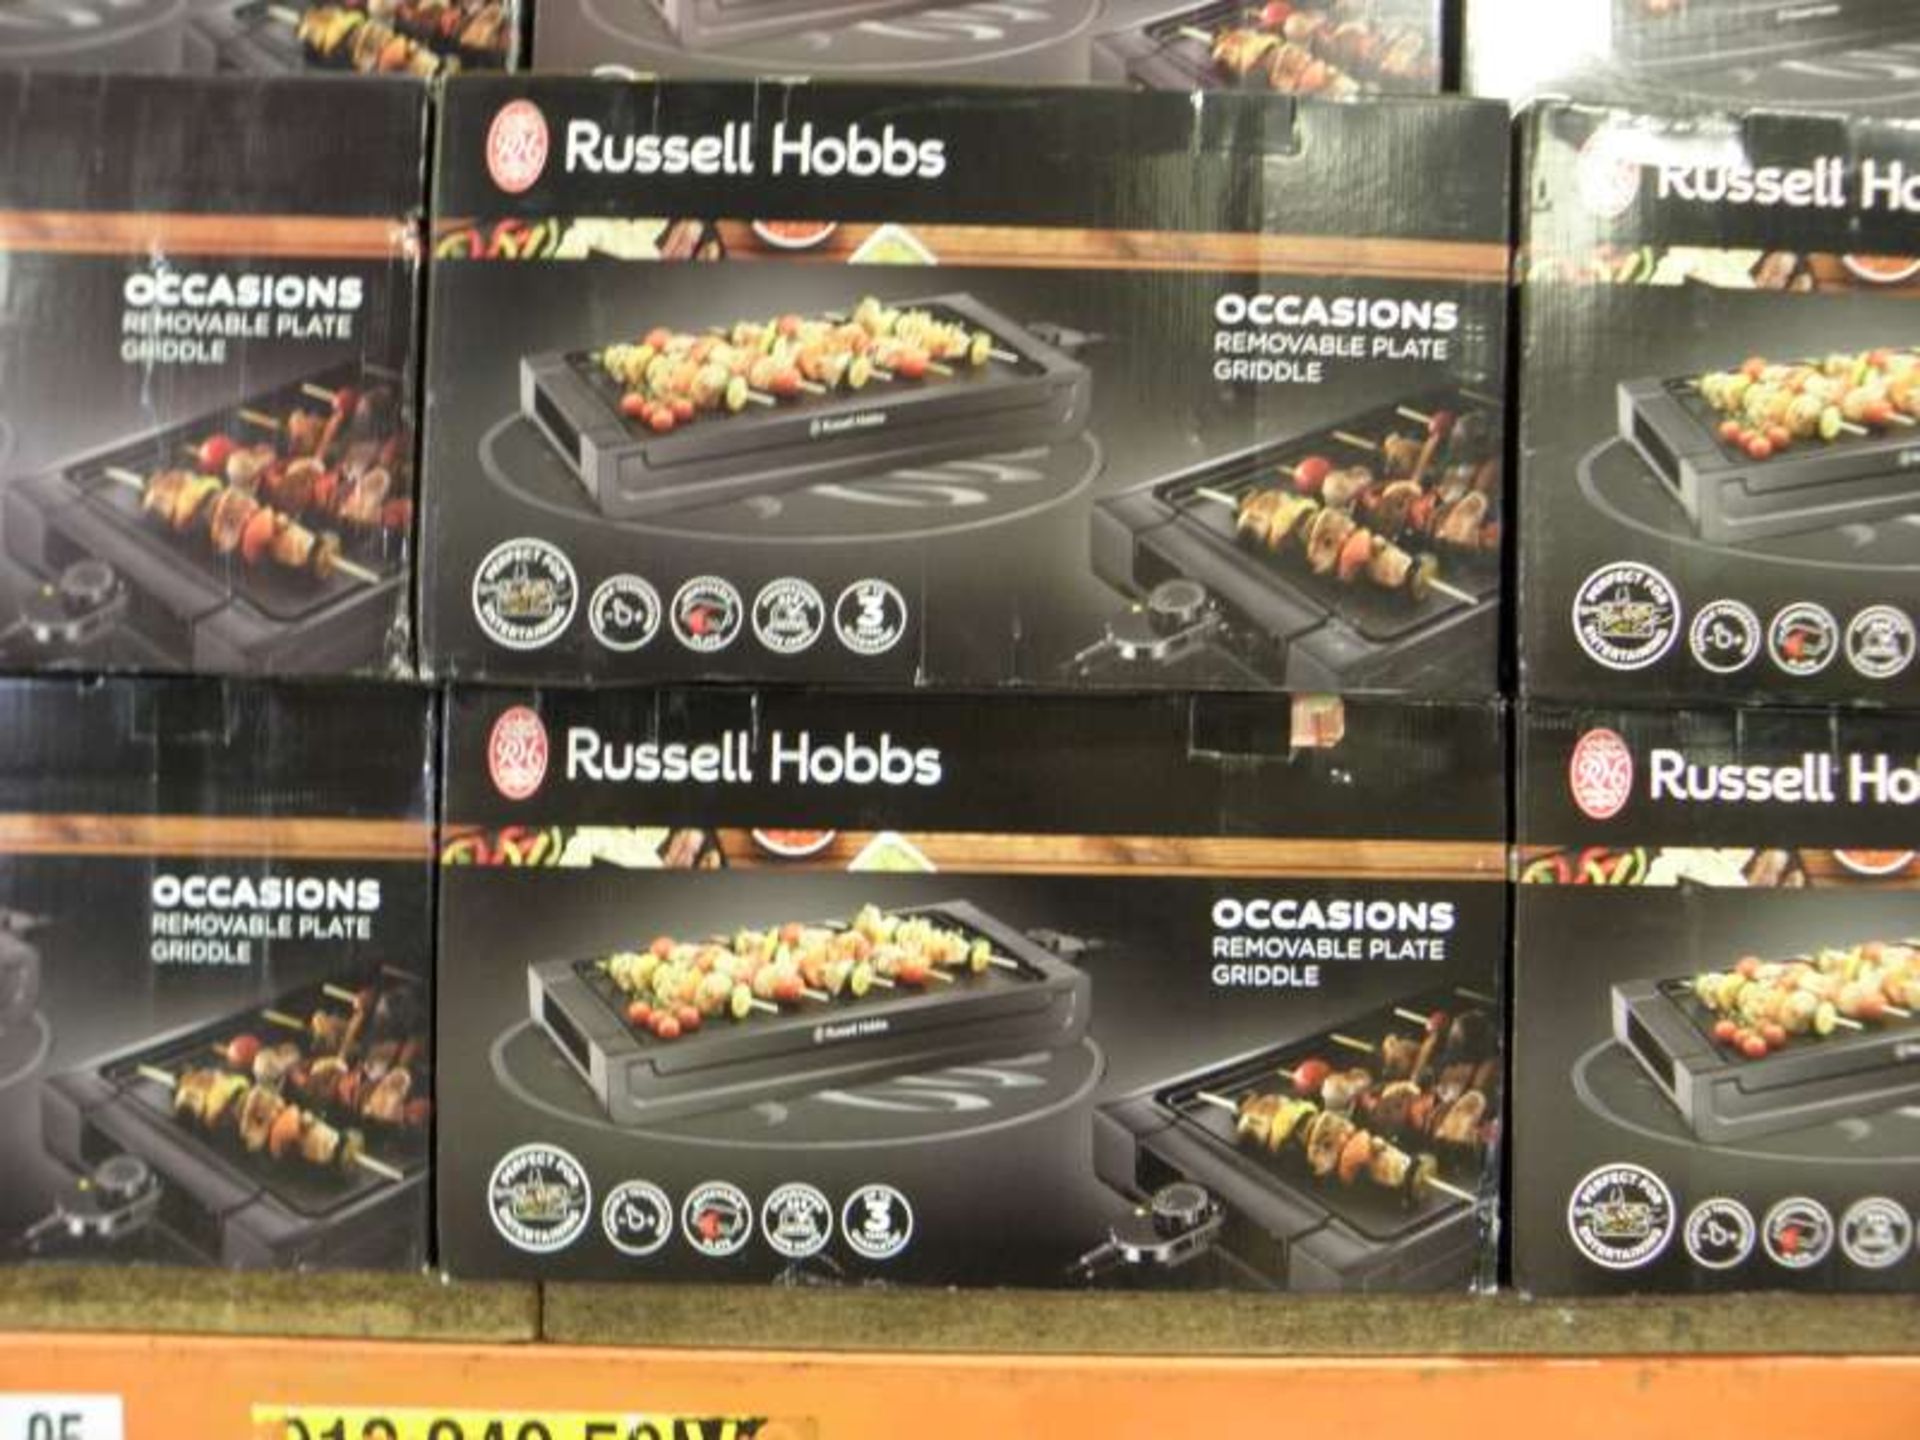 6 X BRAND NEW BOXED RUSSELL HOBBS OCCASIONS REMOVABLE PLATE GRIDDLE